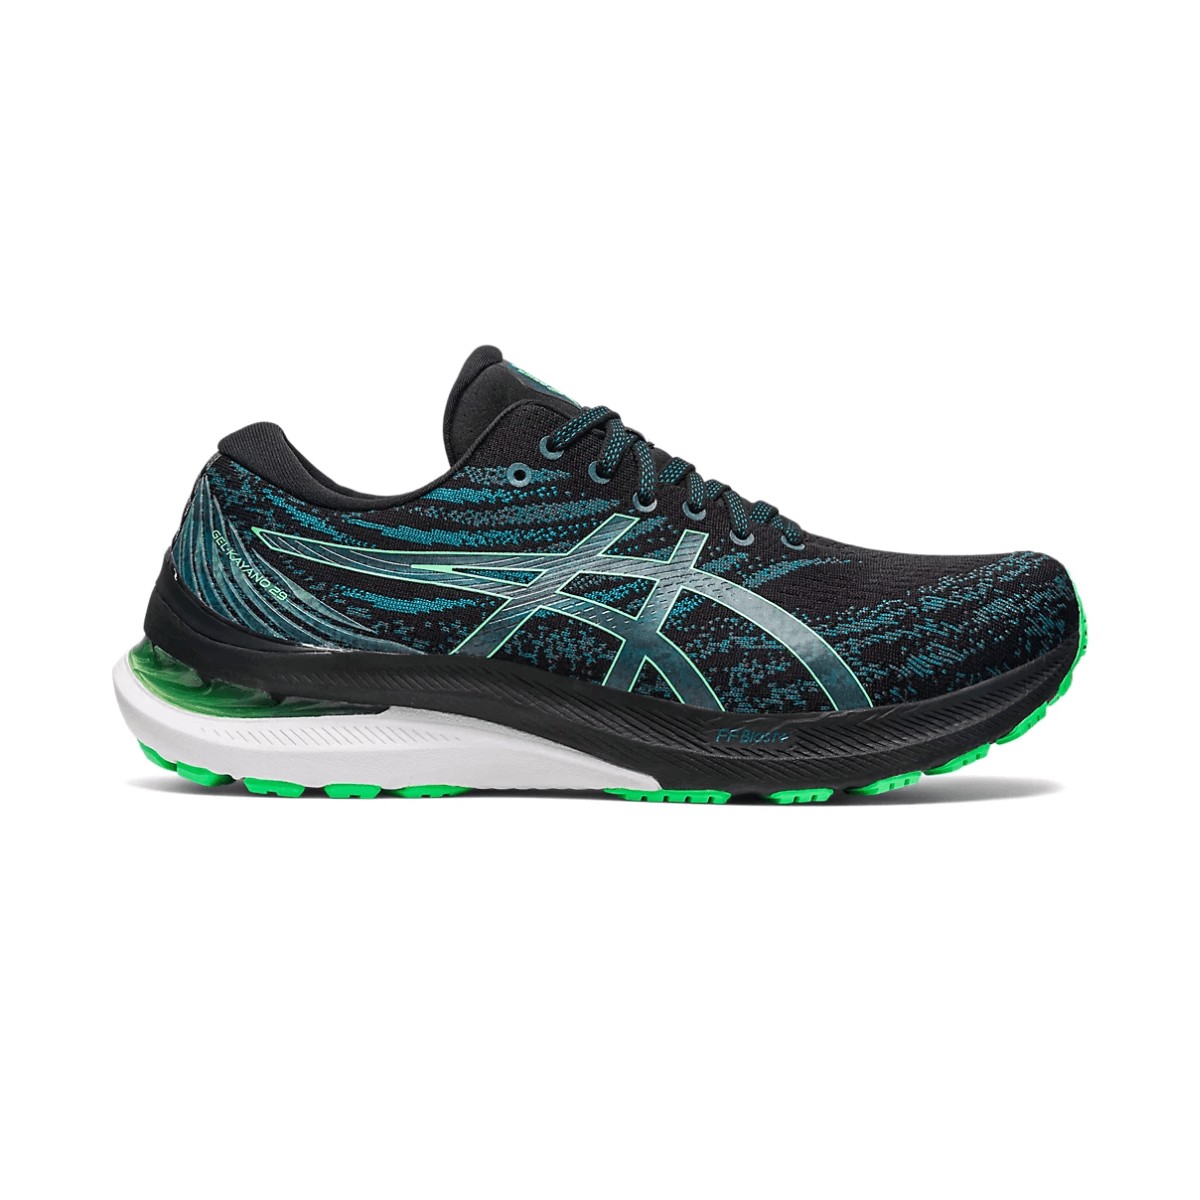 Campo Jabeth Wilson ir a buscar Asics Gel Kayano 29 Running Shoes Black Green | The best price